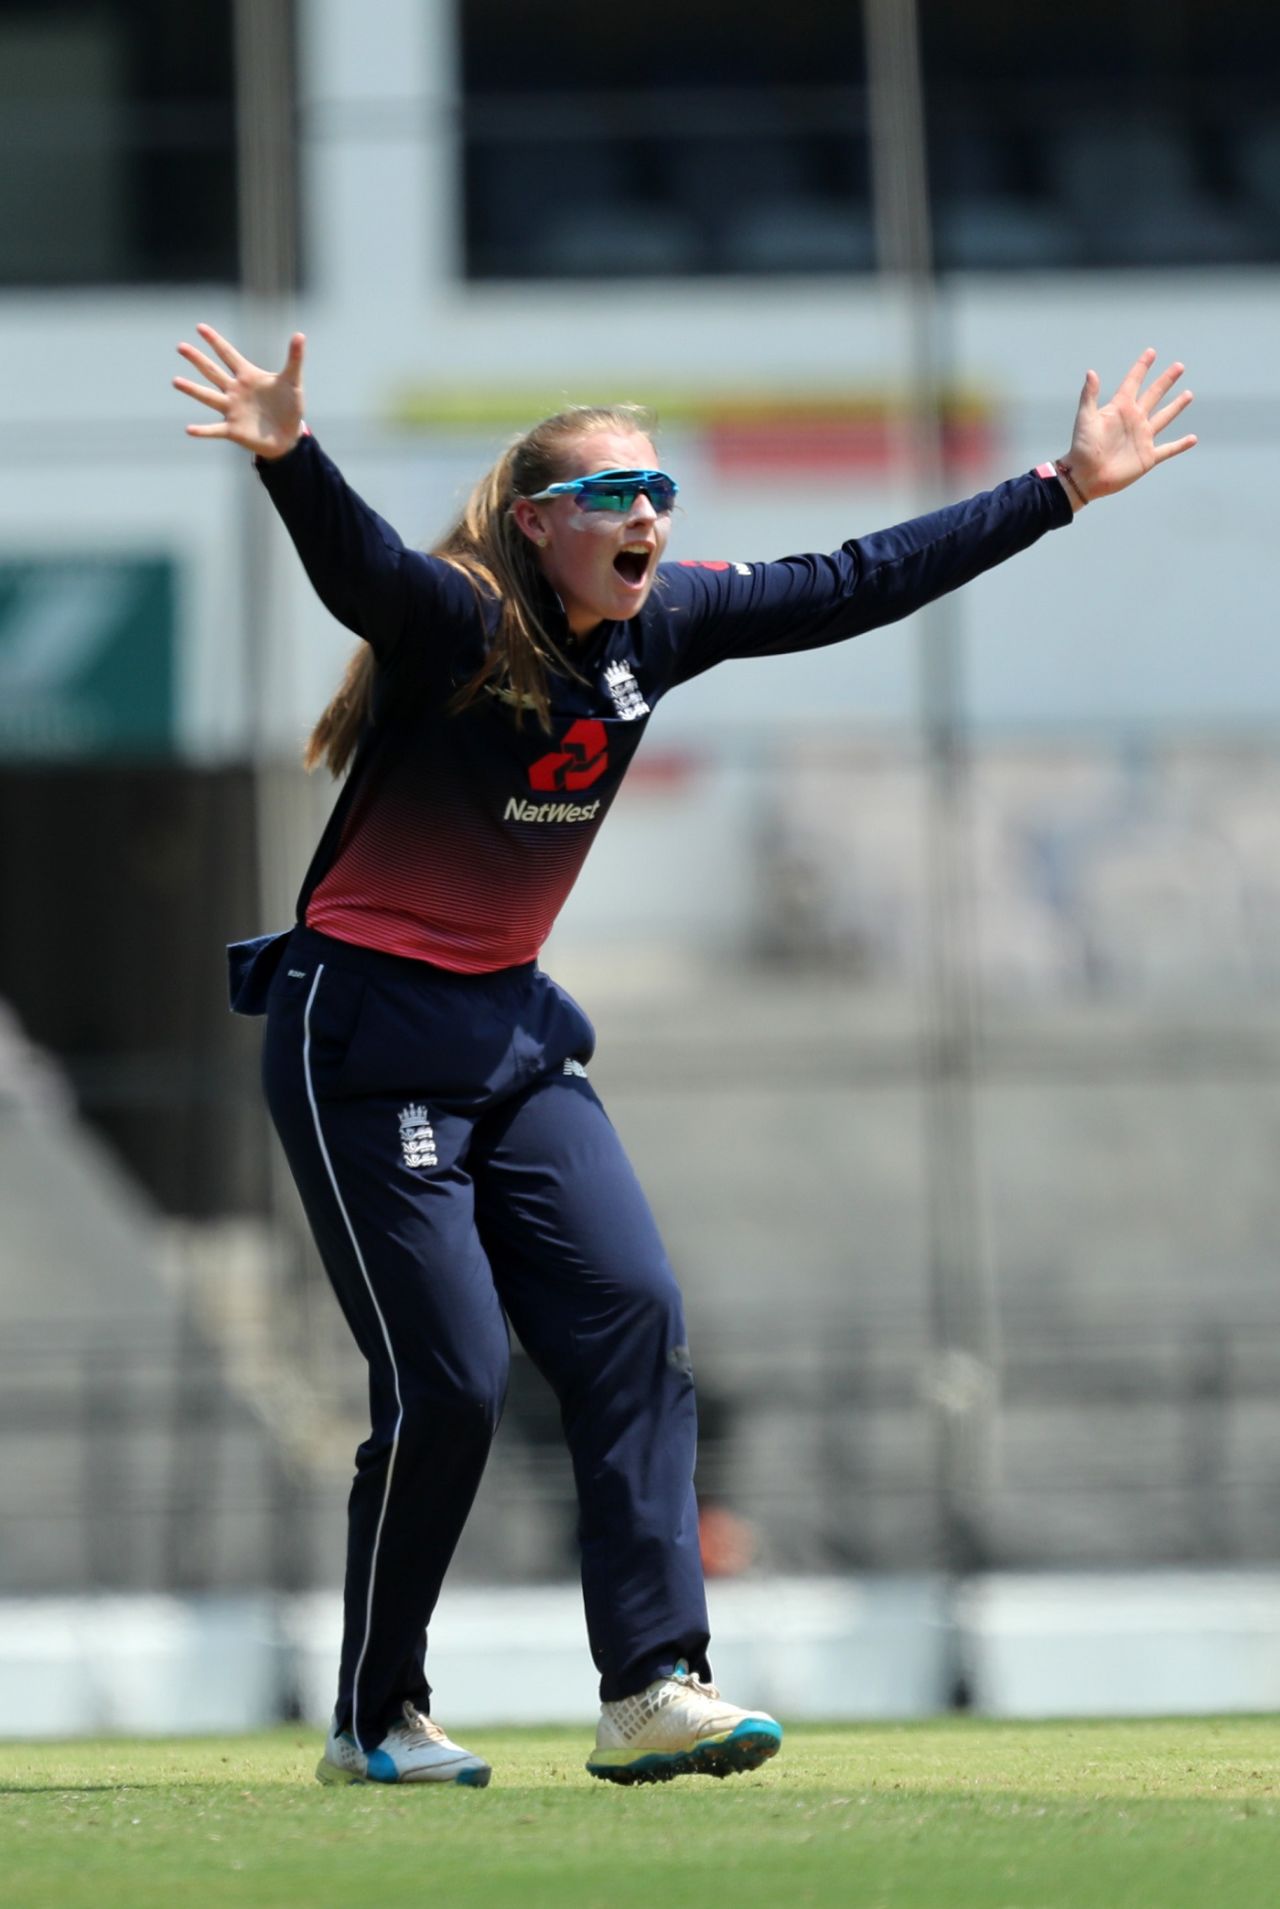 Sophie Ecclestone belts out an appeal, India v England, 2nd women's ODI, Nagpur, April 9, 2018